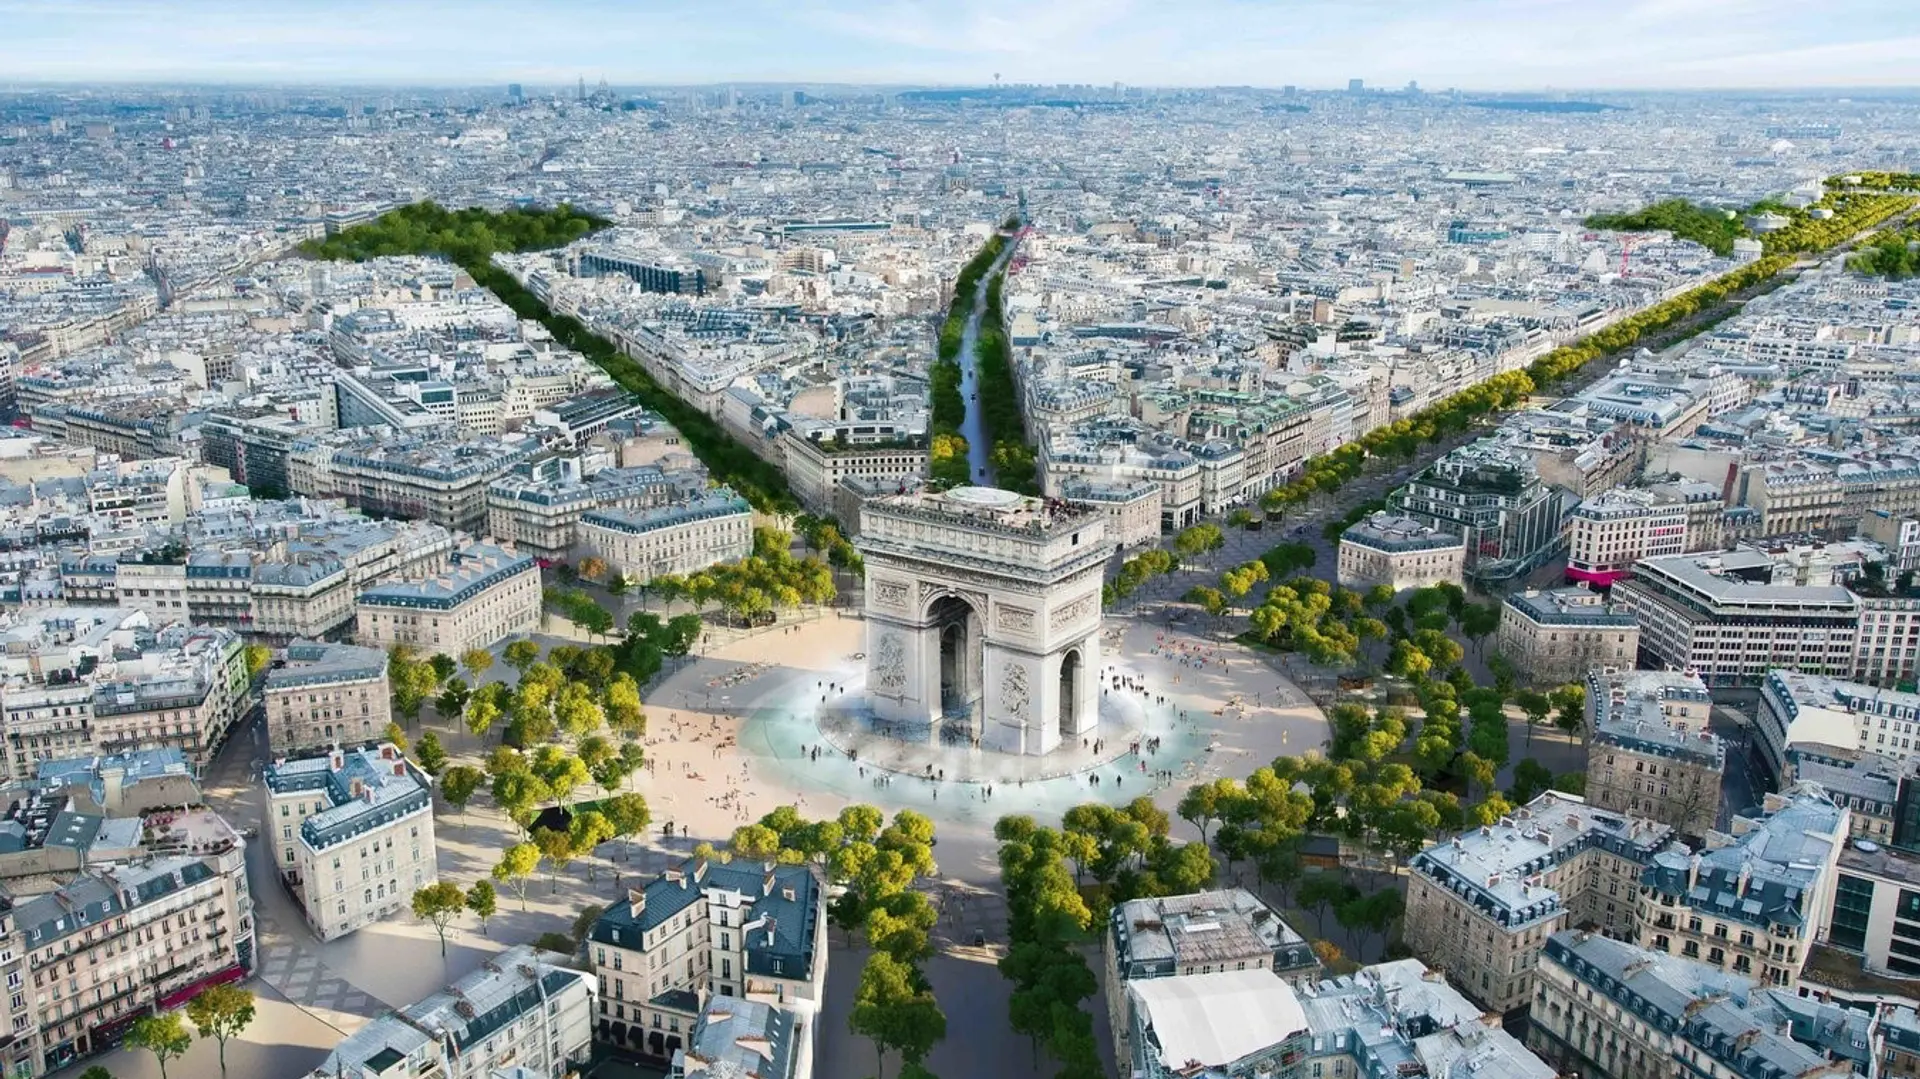 Avenue des champs-elysees seen from bird perspective